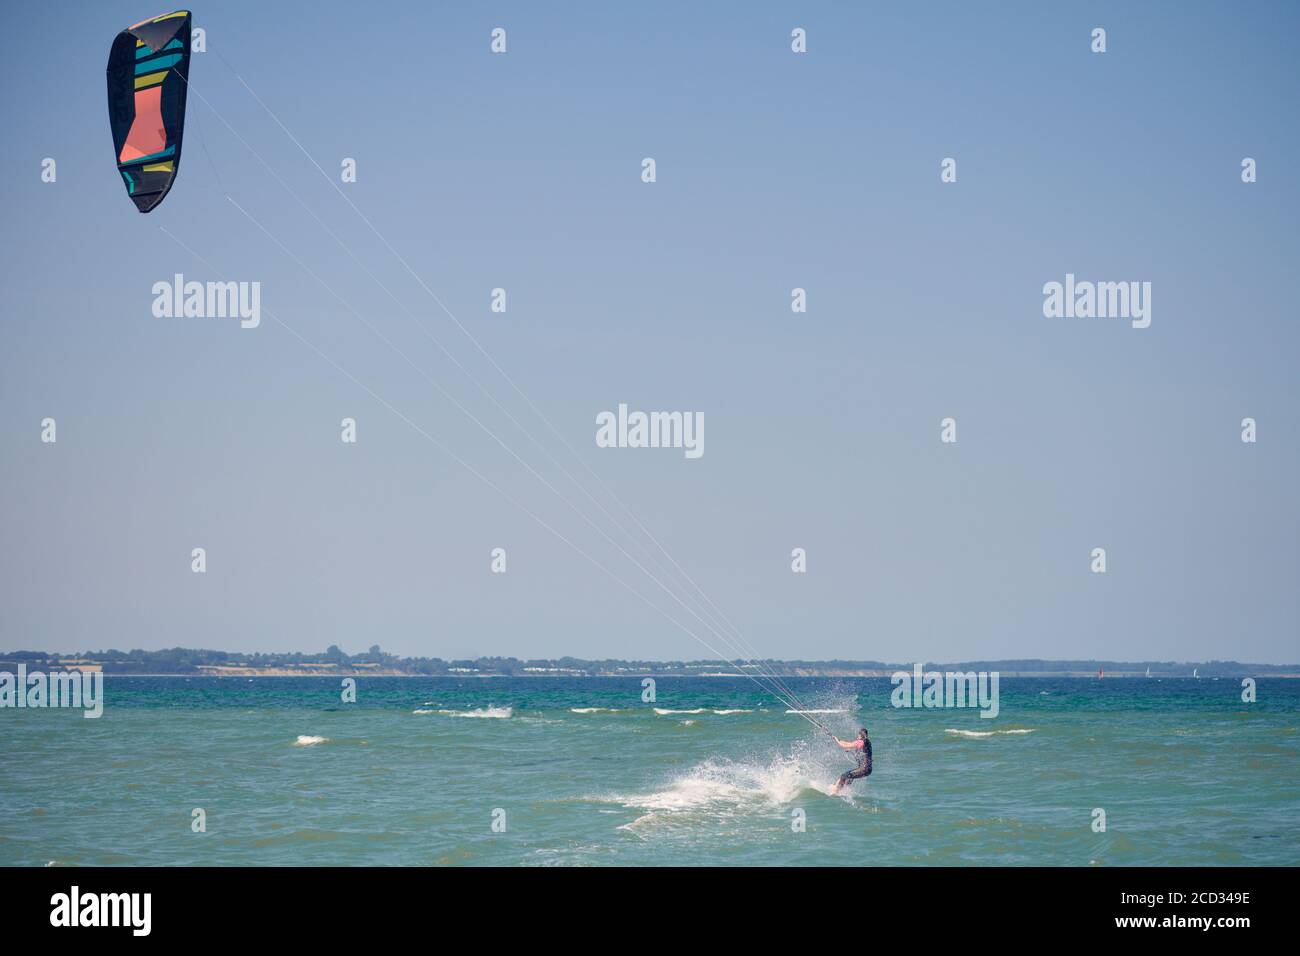 Brunette woman kitesurfing or kite boarding pulling away from the sandy beach making for deeper water on a sunny summer day in a rear view to the came Stock Photo